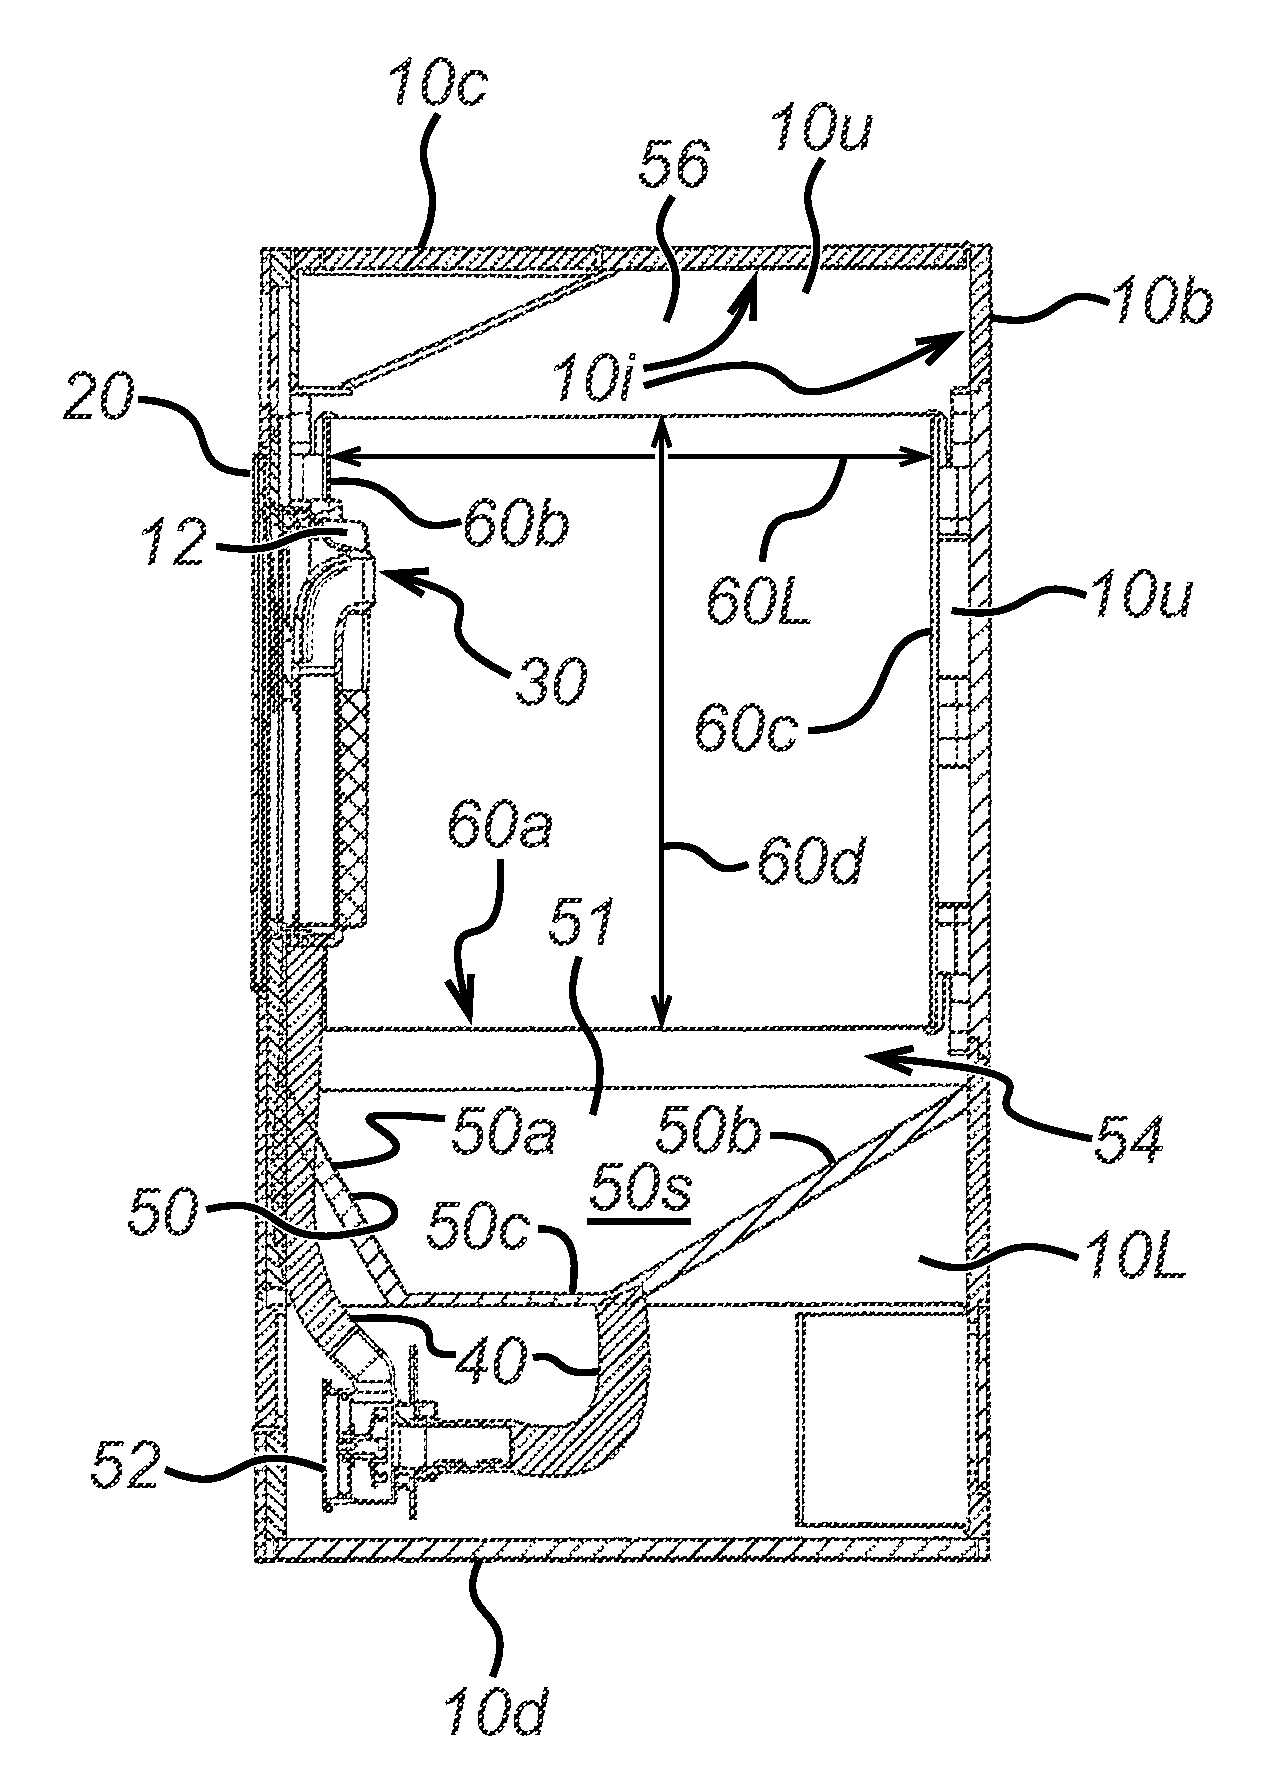 Cleaning apparatus and method